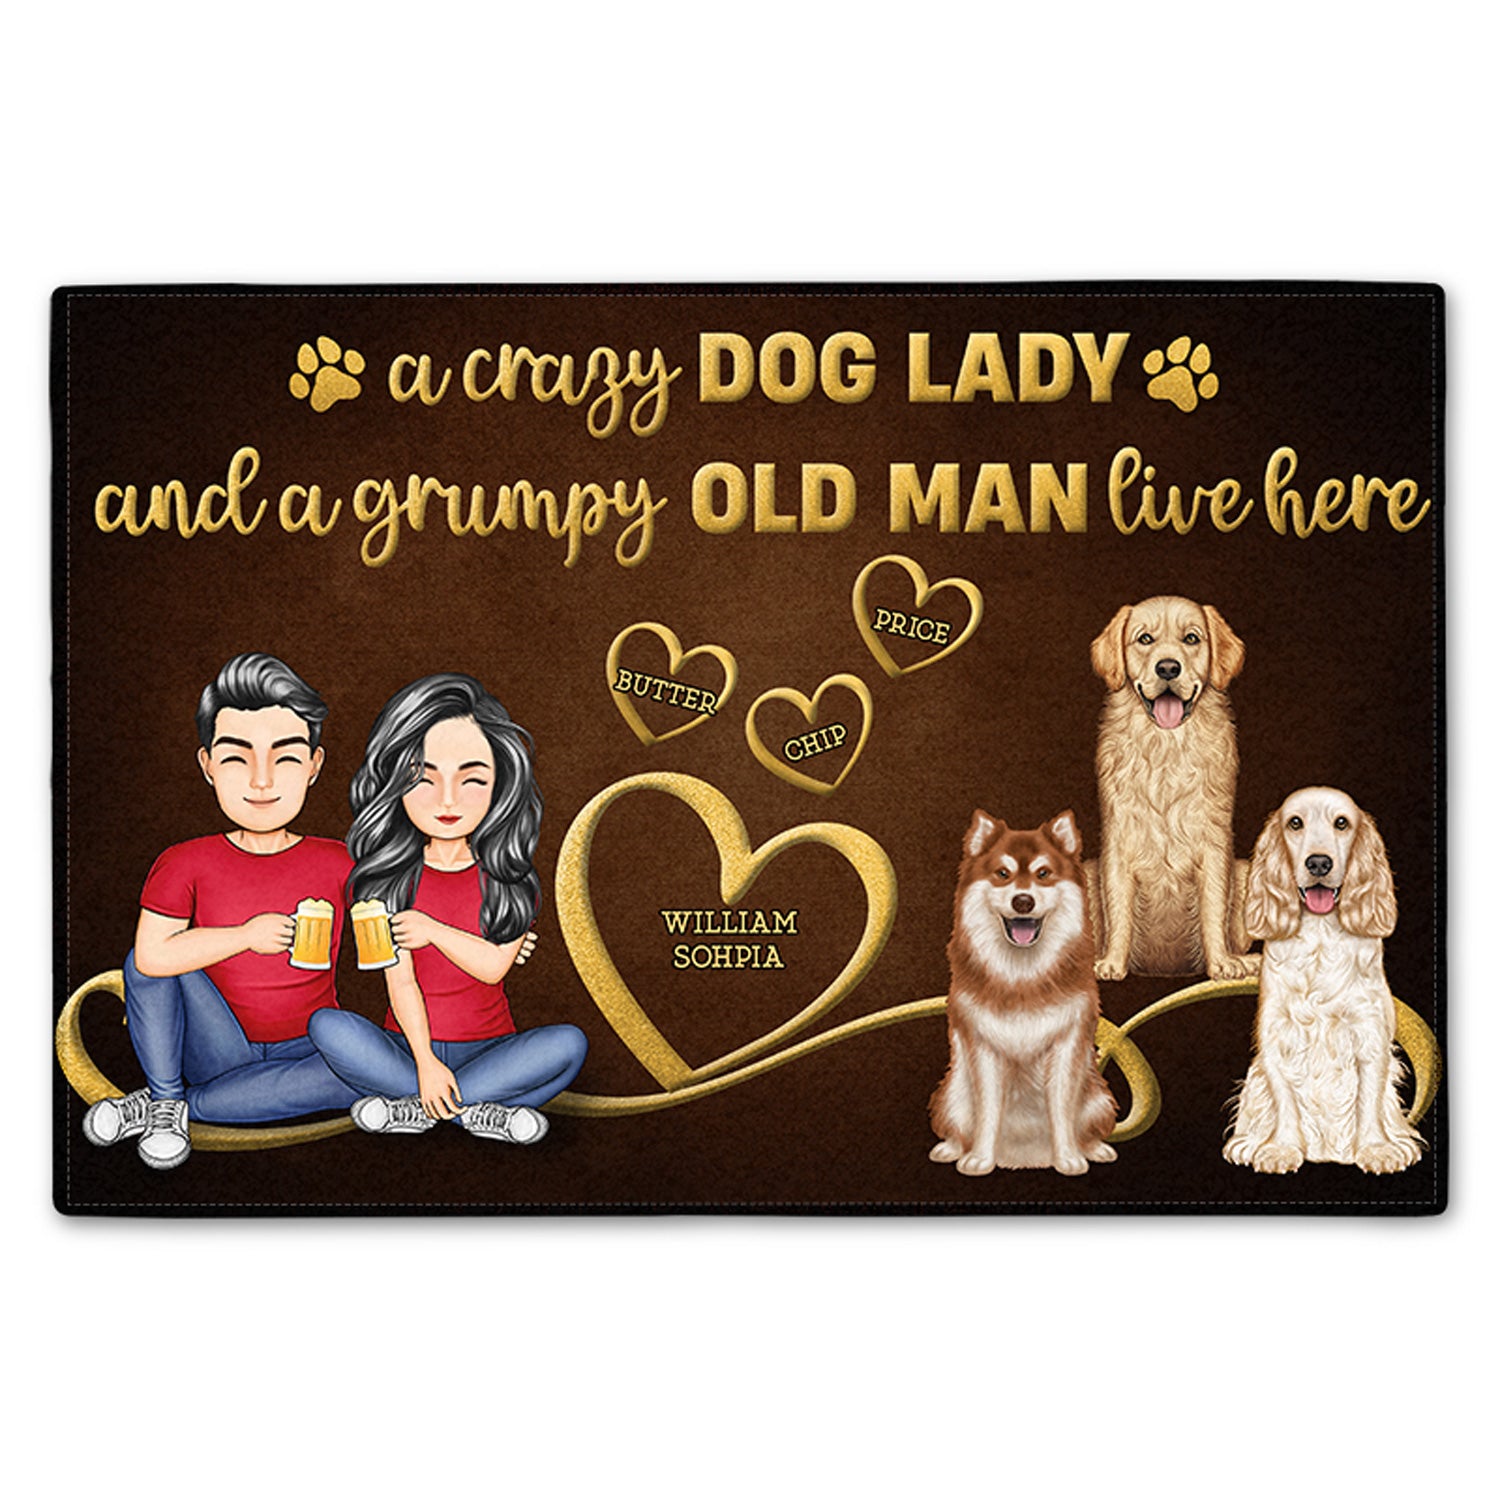 A Crazy Dog Lady & A Grumpy Old Man Live Here - Home Decor Gift For Dog Lovers - Personalized Doormat